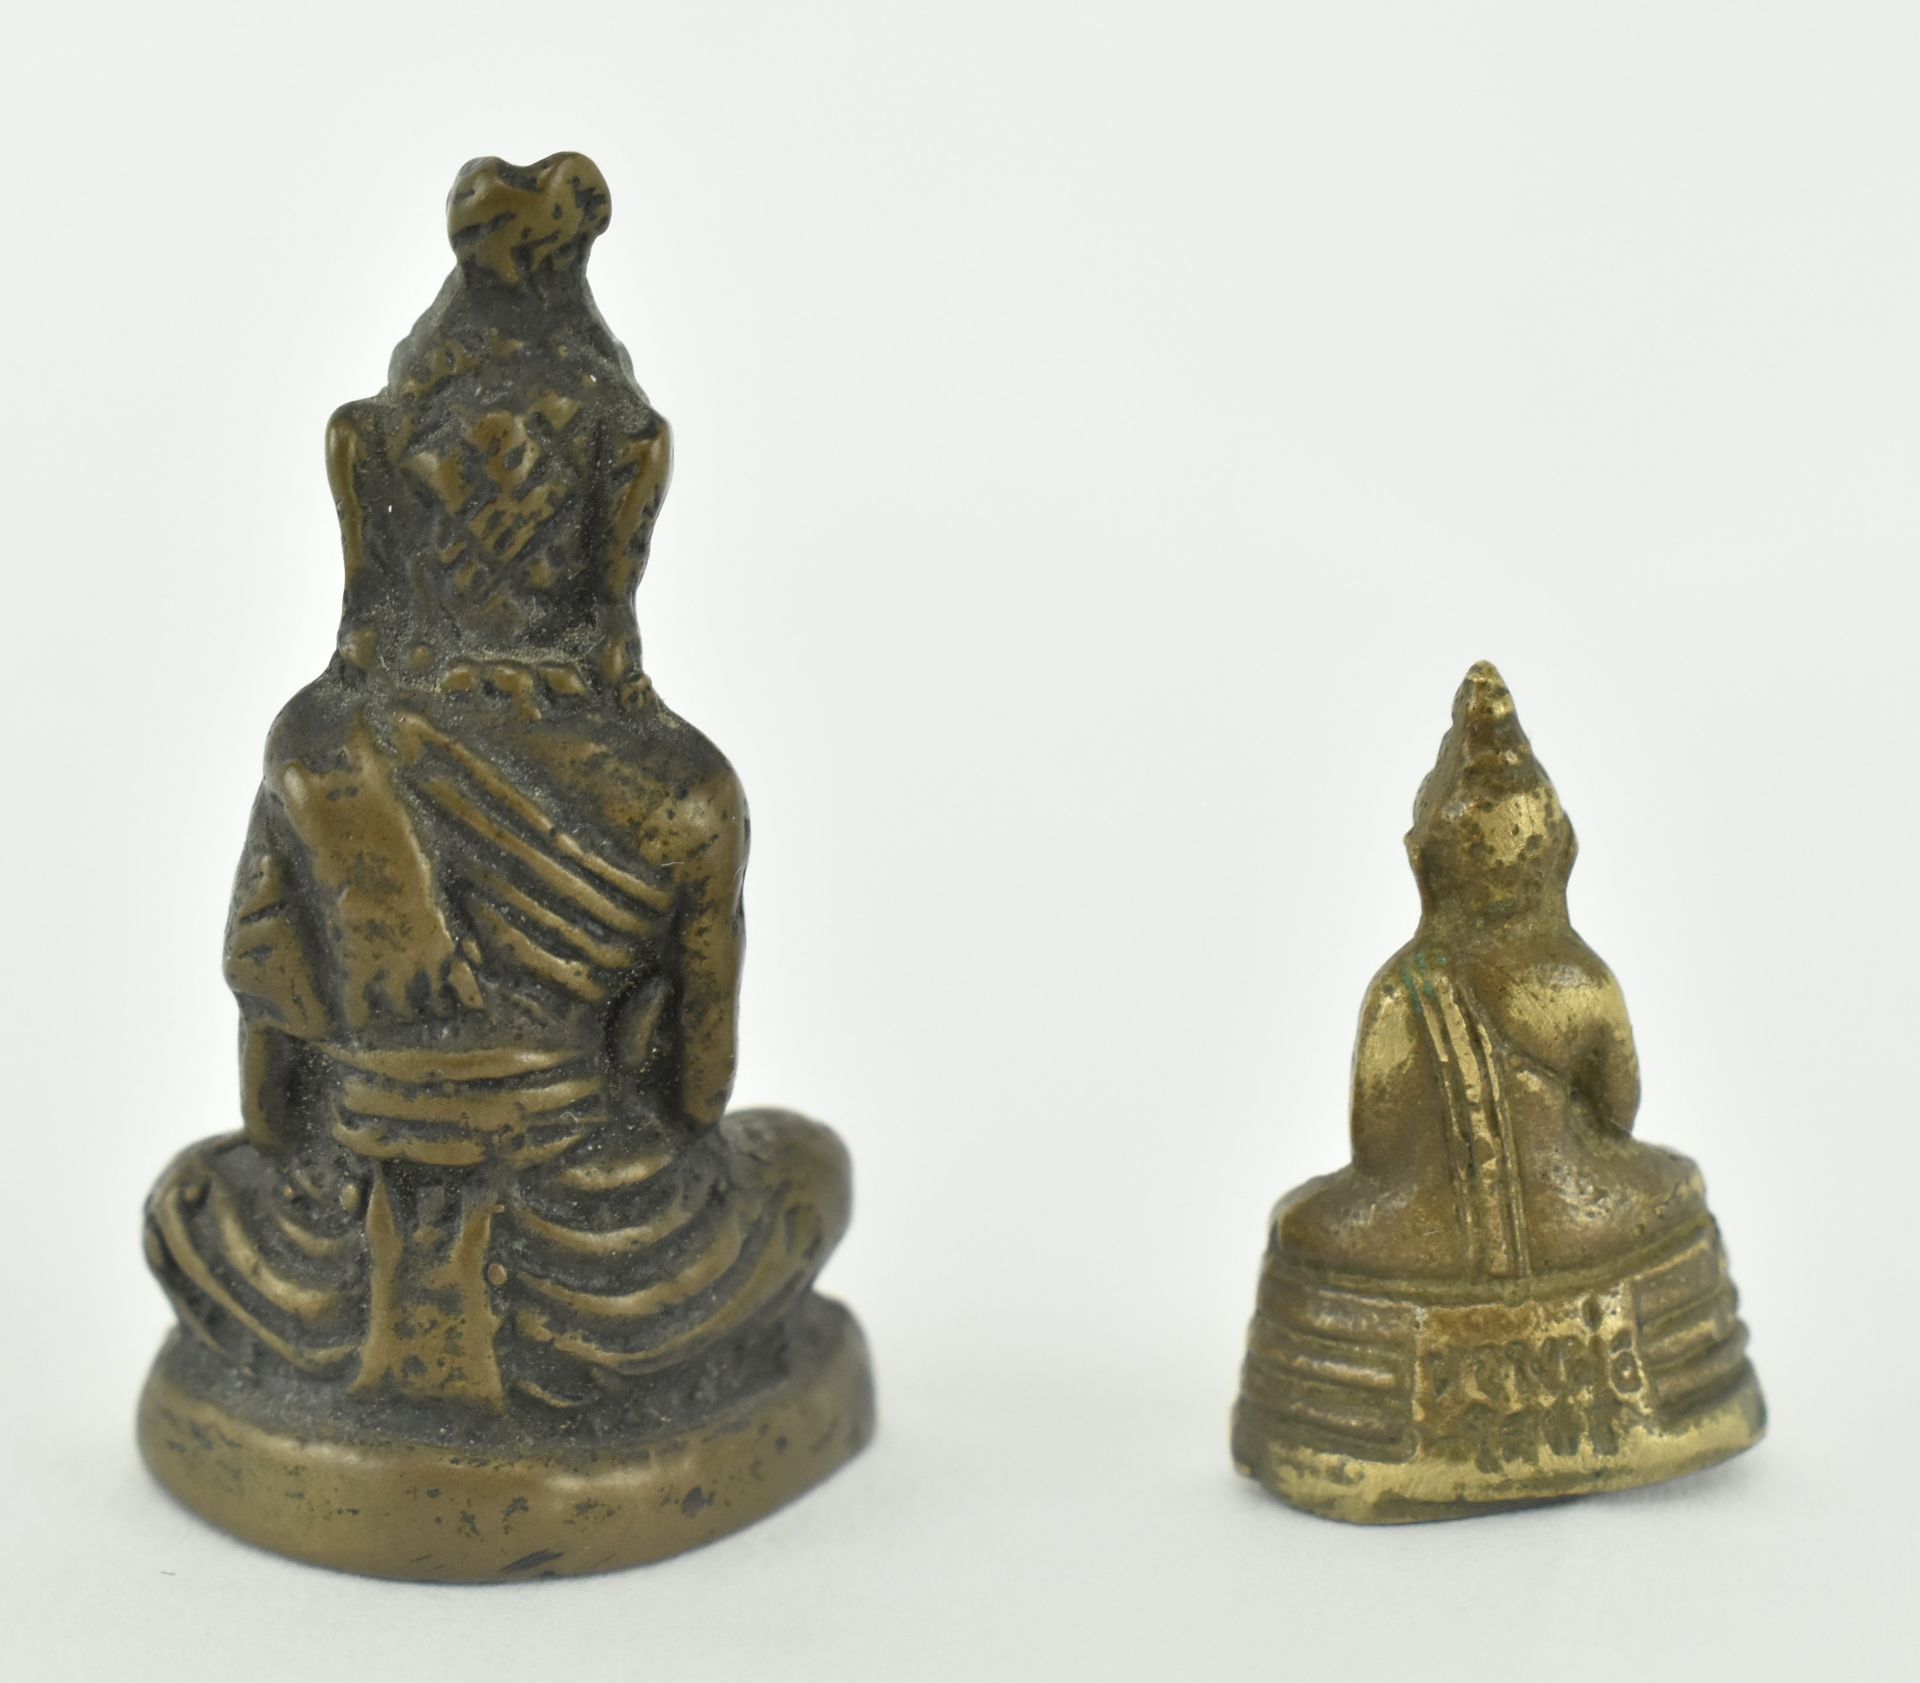 TWO SOUTH EAST ASIAN AMULETS IN LOTUS POSITION - Image 3 of 5